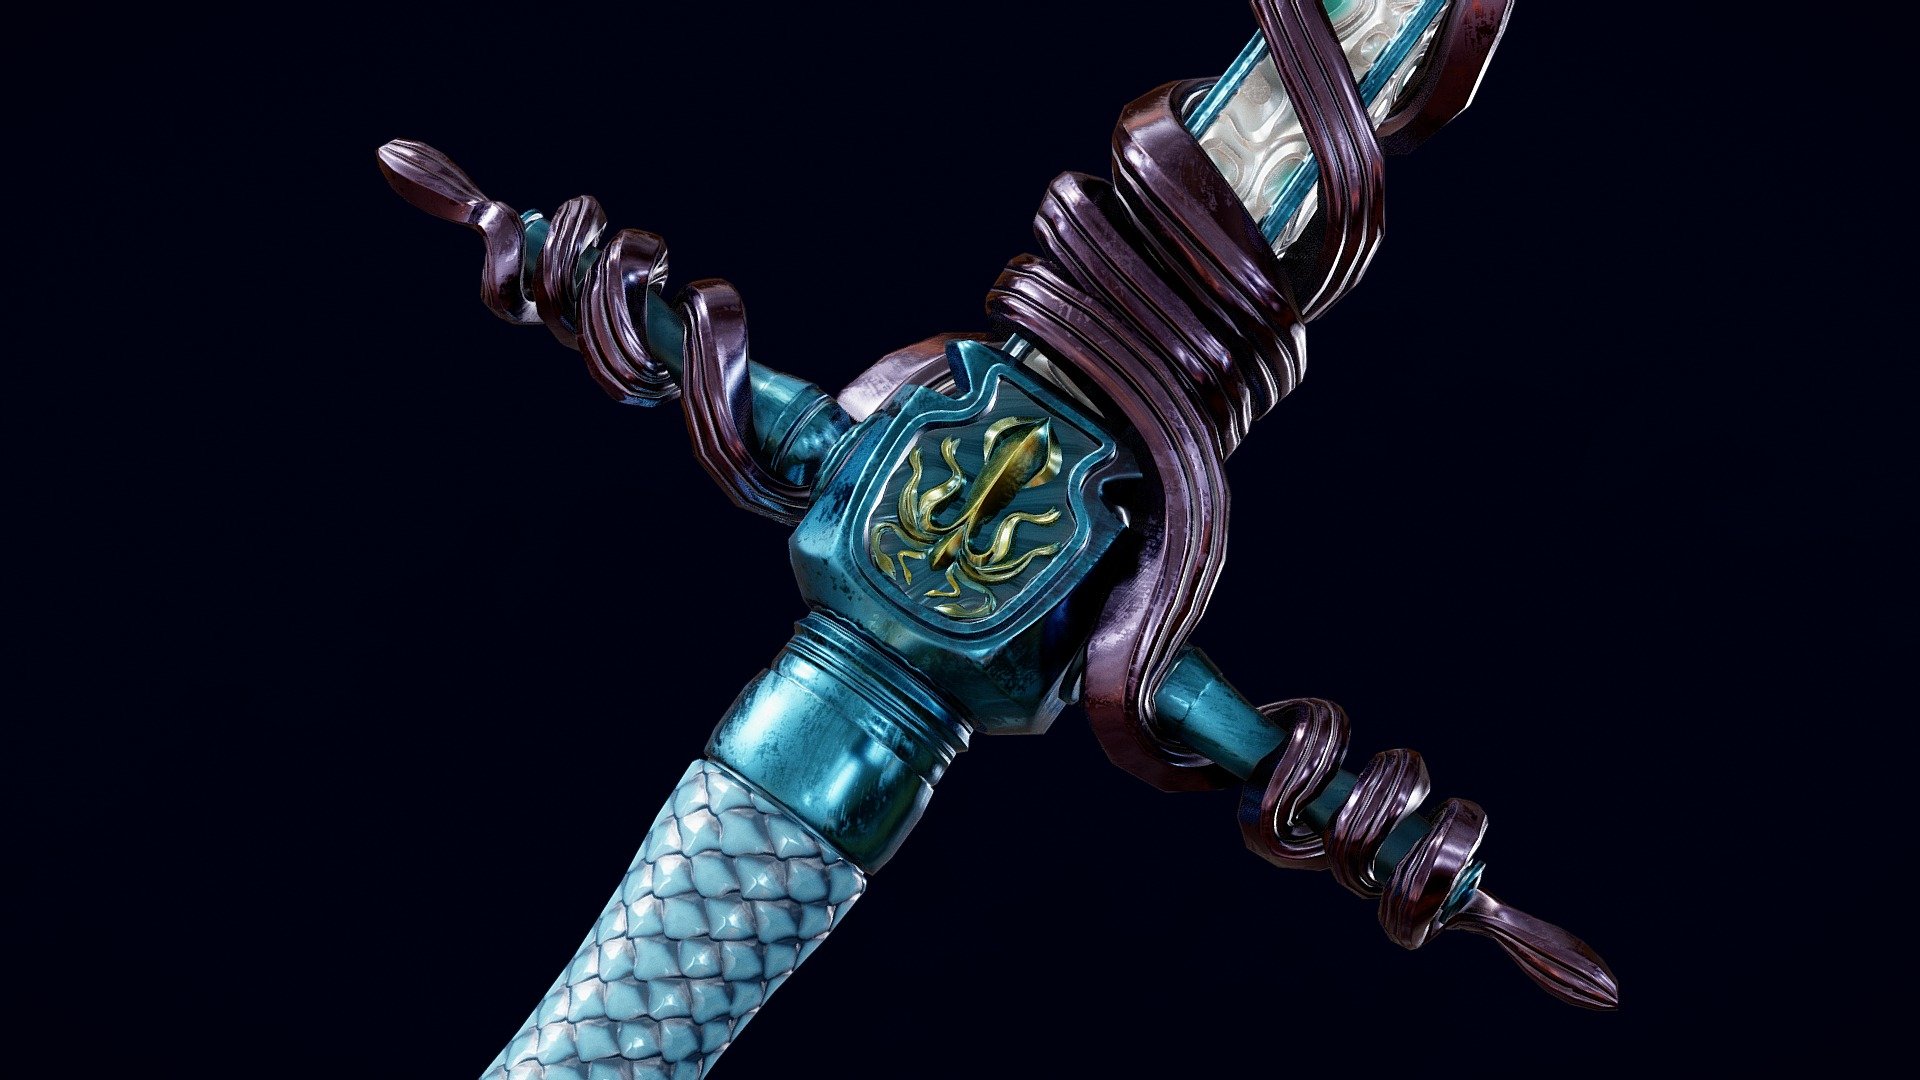 Made for internship in Pyramid Games Studio. A lot knowledge i got from my mentor Навiжена Лярва https://www.artstation.com/liarva while makieng this dagger.
He helped me a lot with making it more realistic, creative and as high quality as it as it could be 3d model